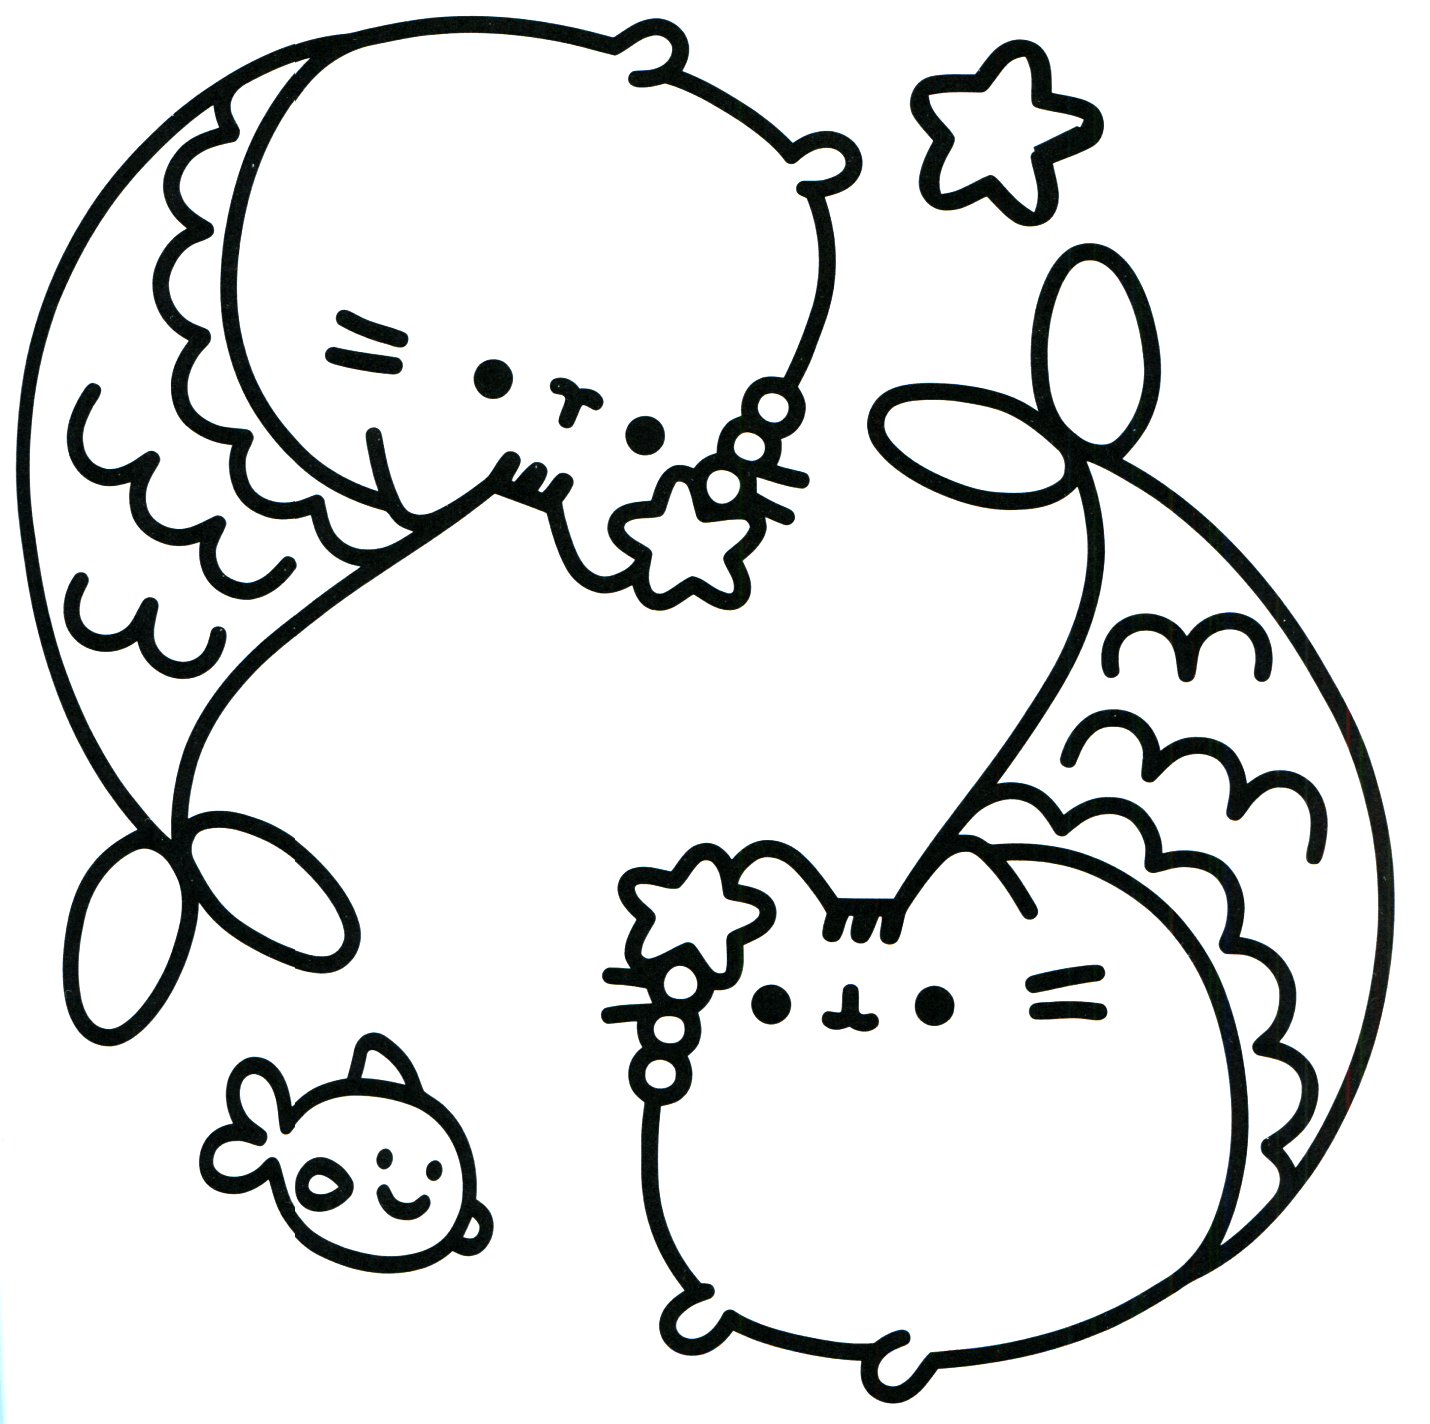 Two cat mermaid Coloring Pages